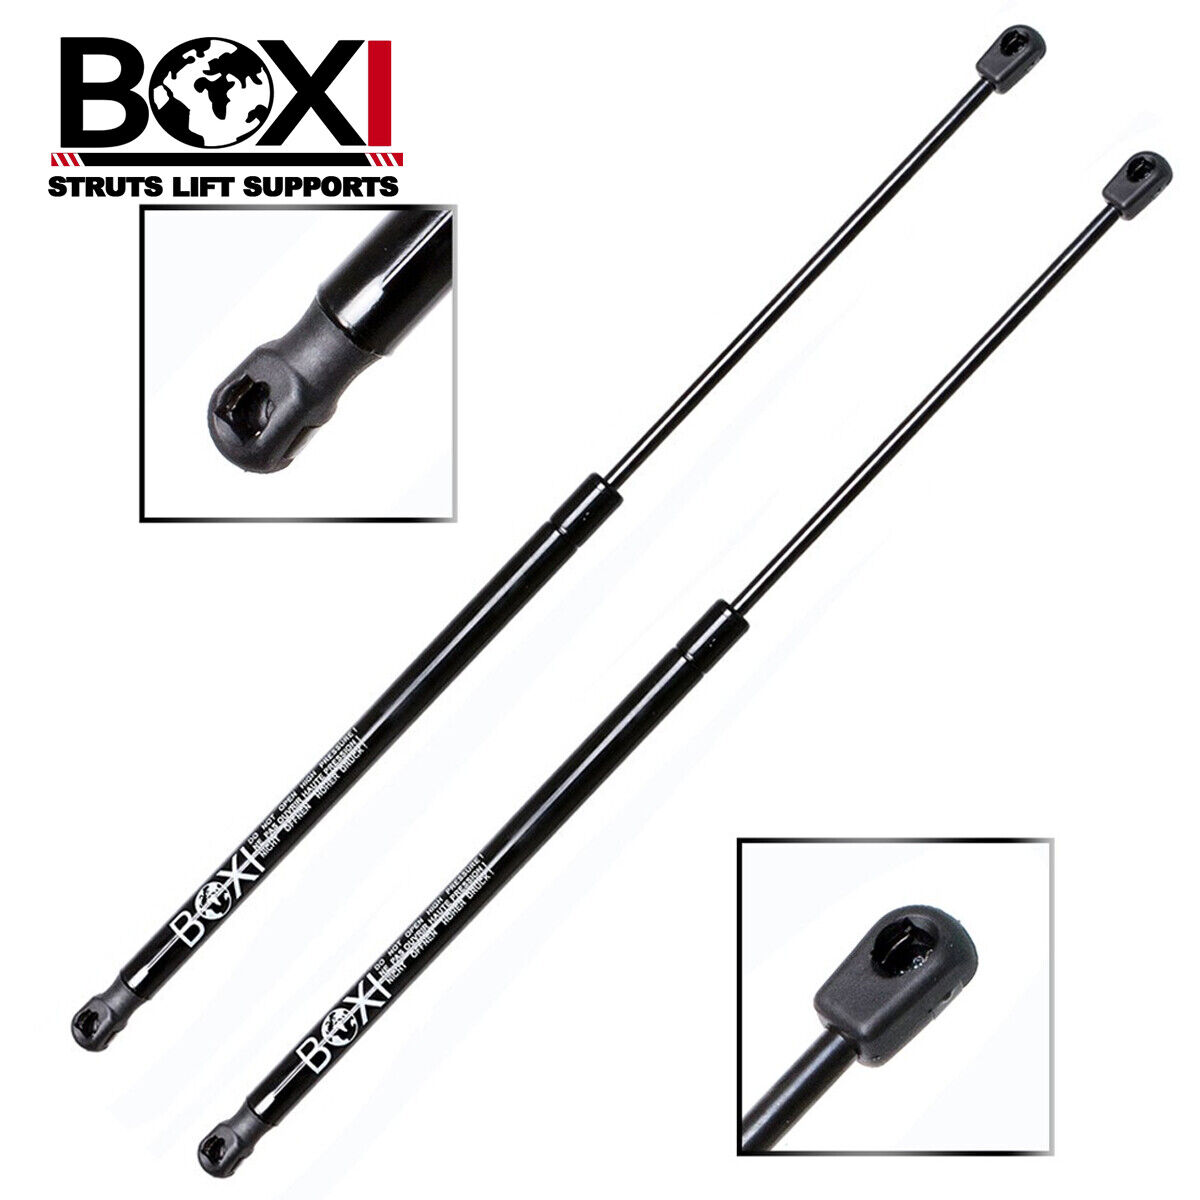 1Pair Front Hood Lift Supports Shocks Struts For Infiniti G25 G35 G37 2007-2013